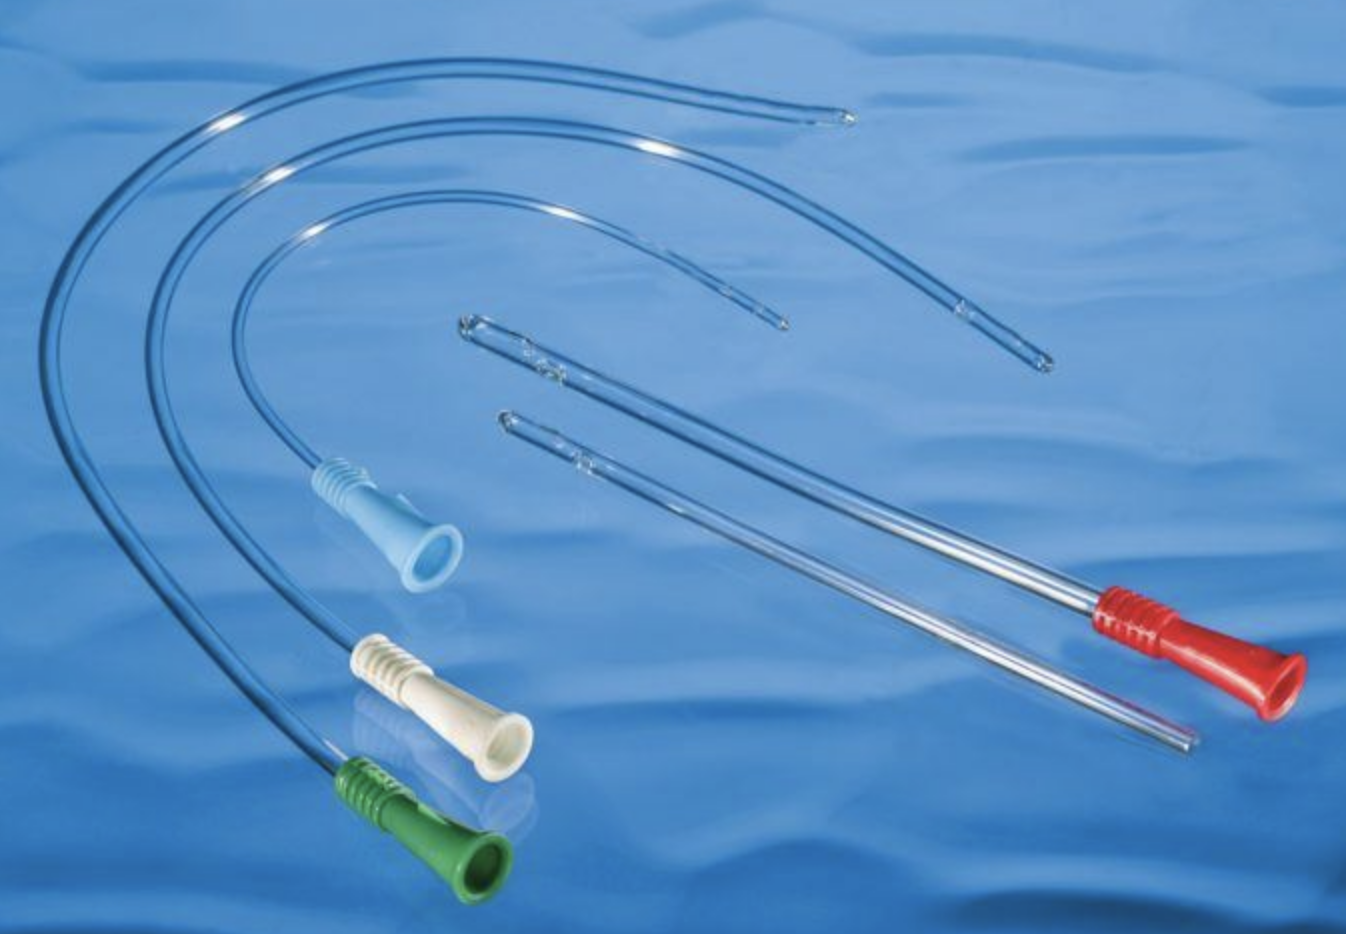 Why would you use a foley catheter? Types, uses, care and more!